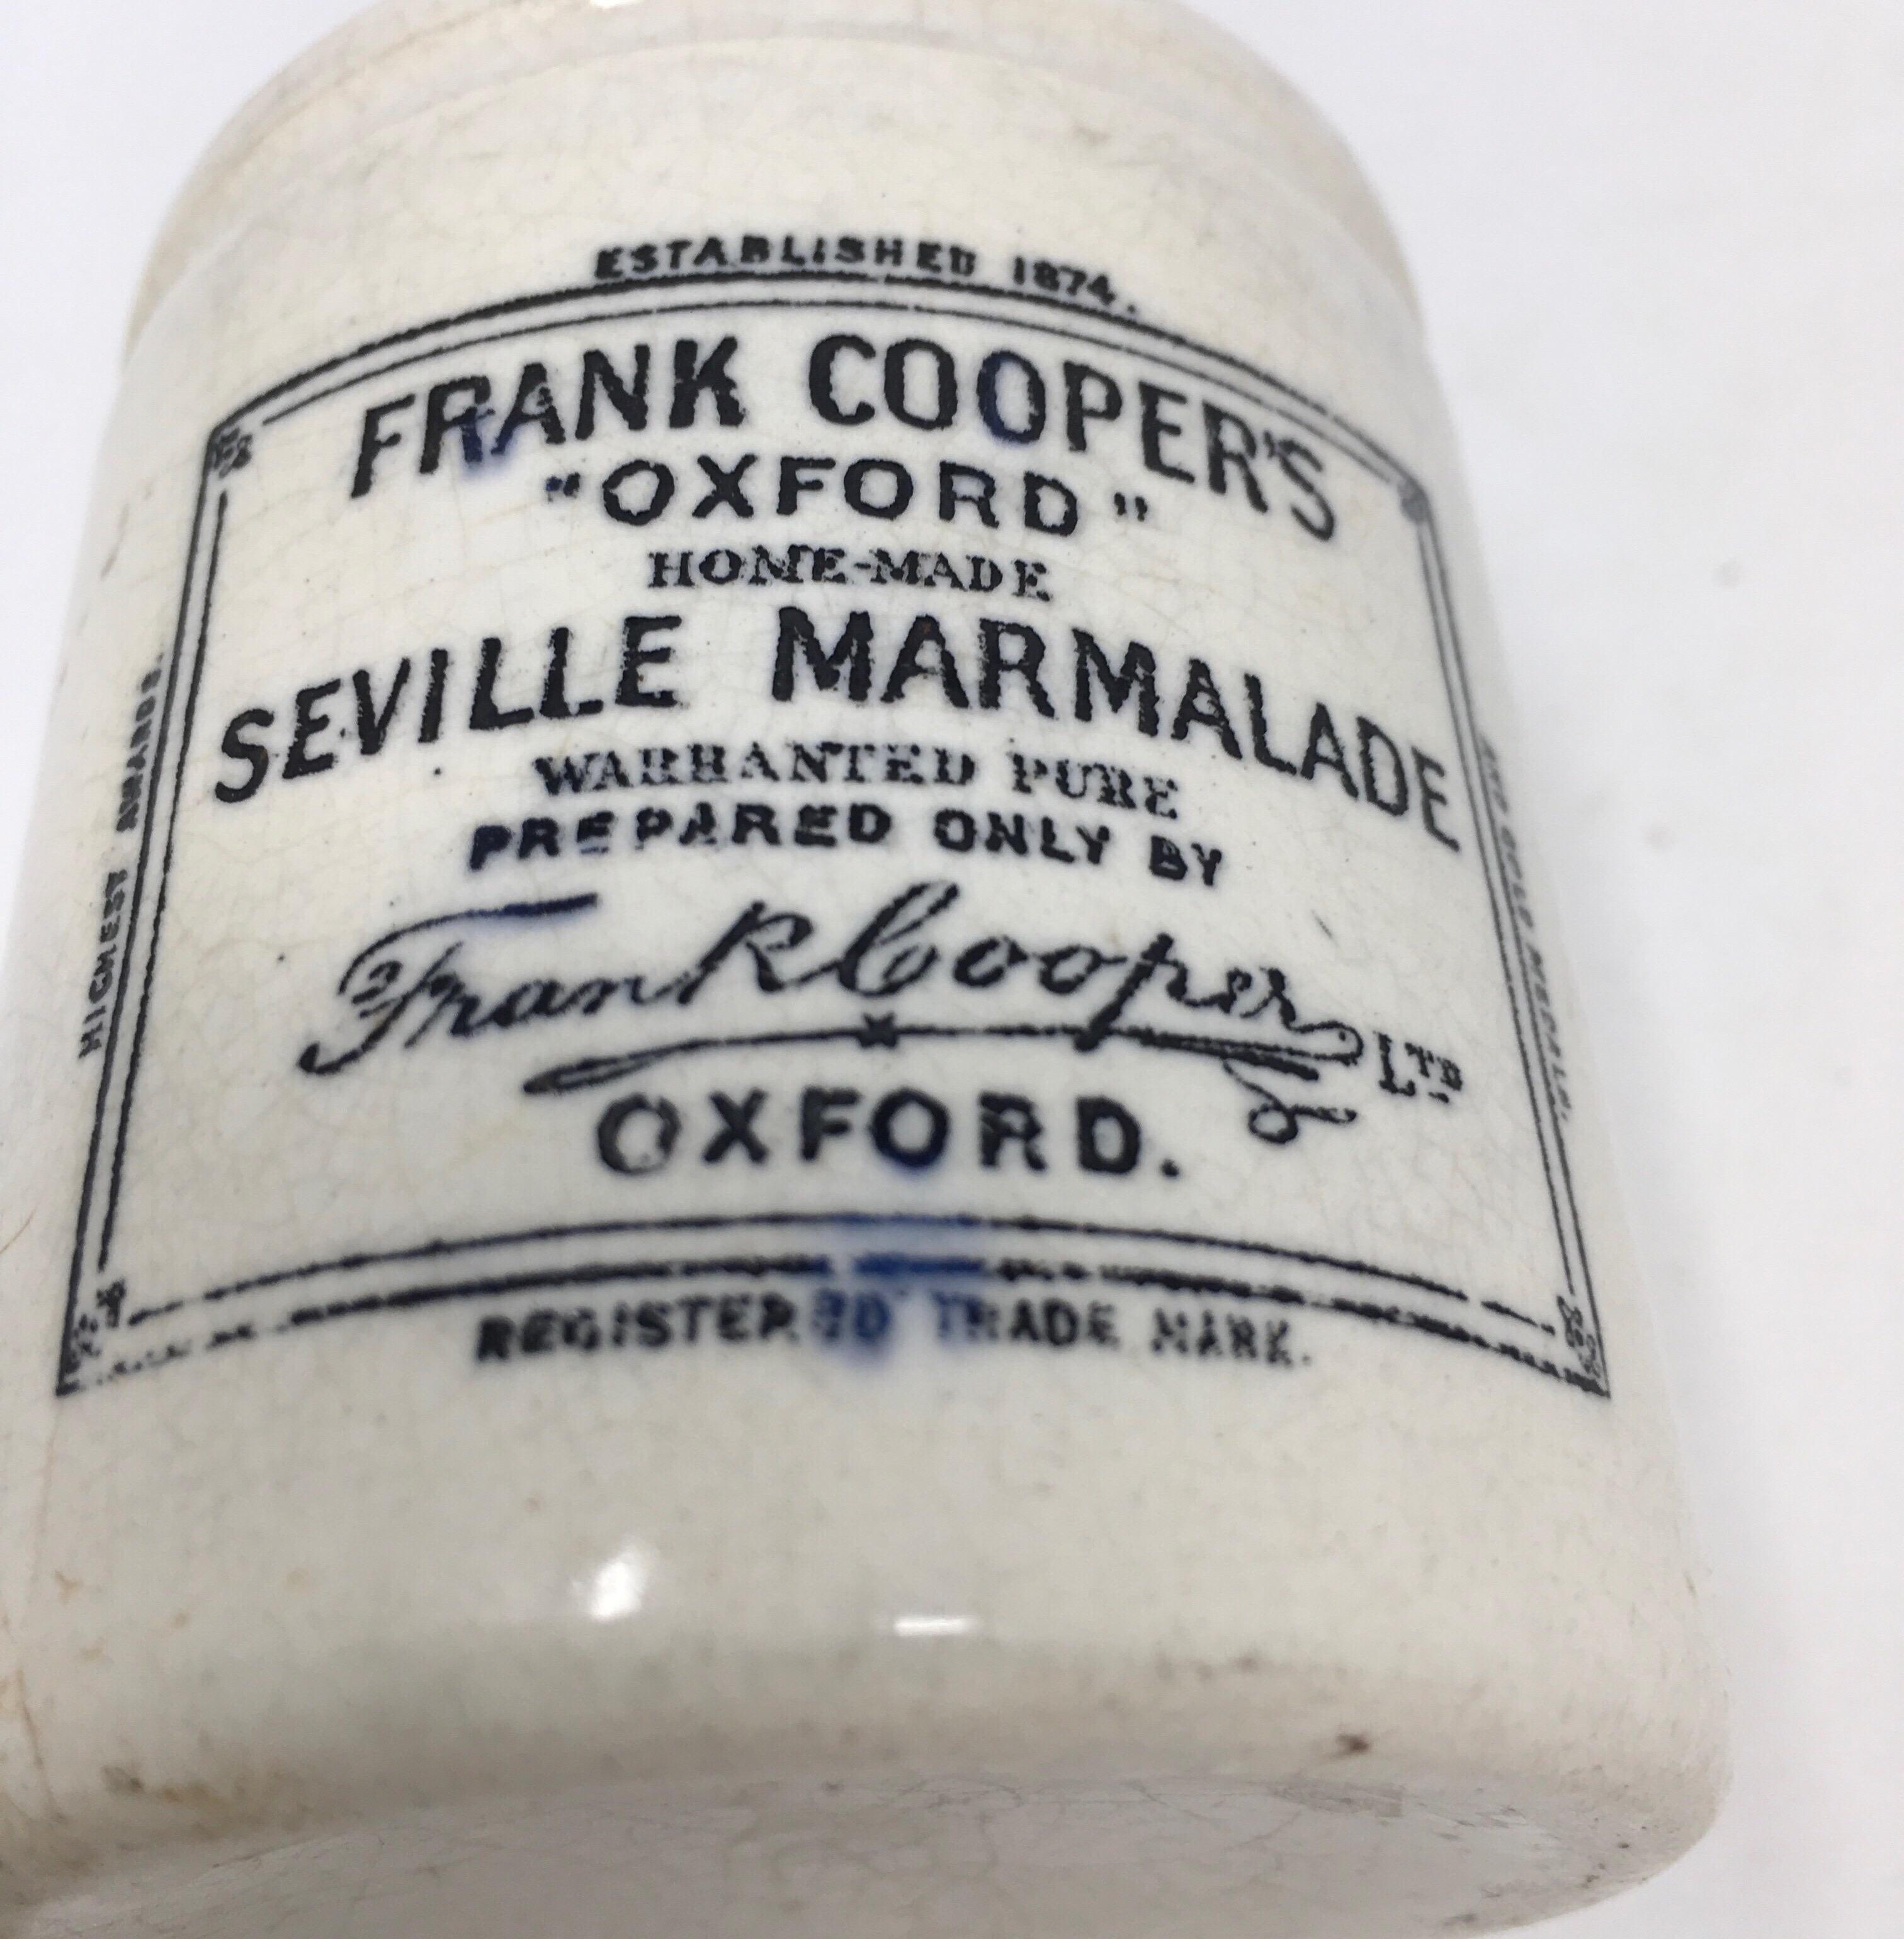 This wonderfully charming pot is an early version of the sought after Frank Cooper Marmalade. Frank Cooper (1844-1927) inherited his father’s grocery store in 1867. It is said that in 1874, his 24-year-old wife, Sarah-Jane produced 76 lbs of